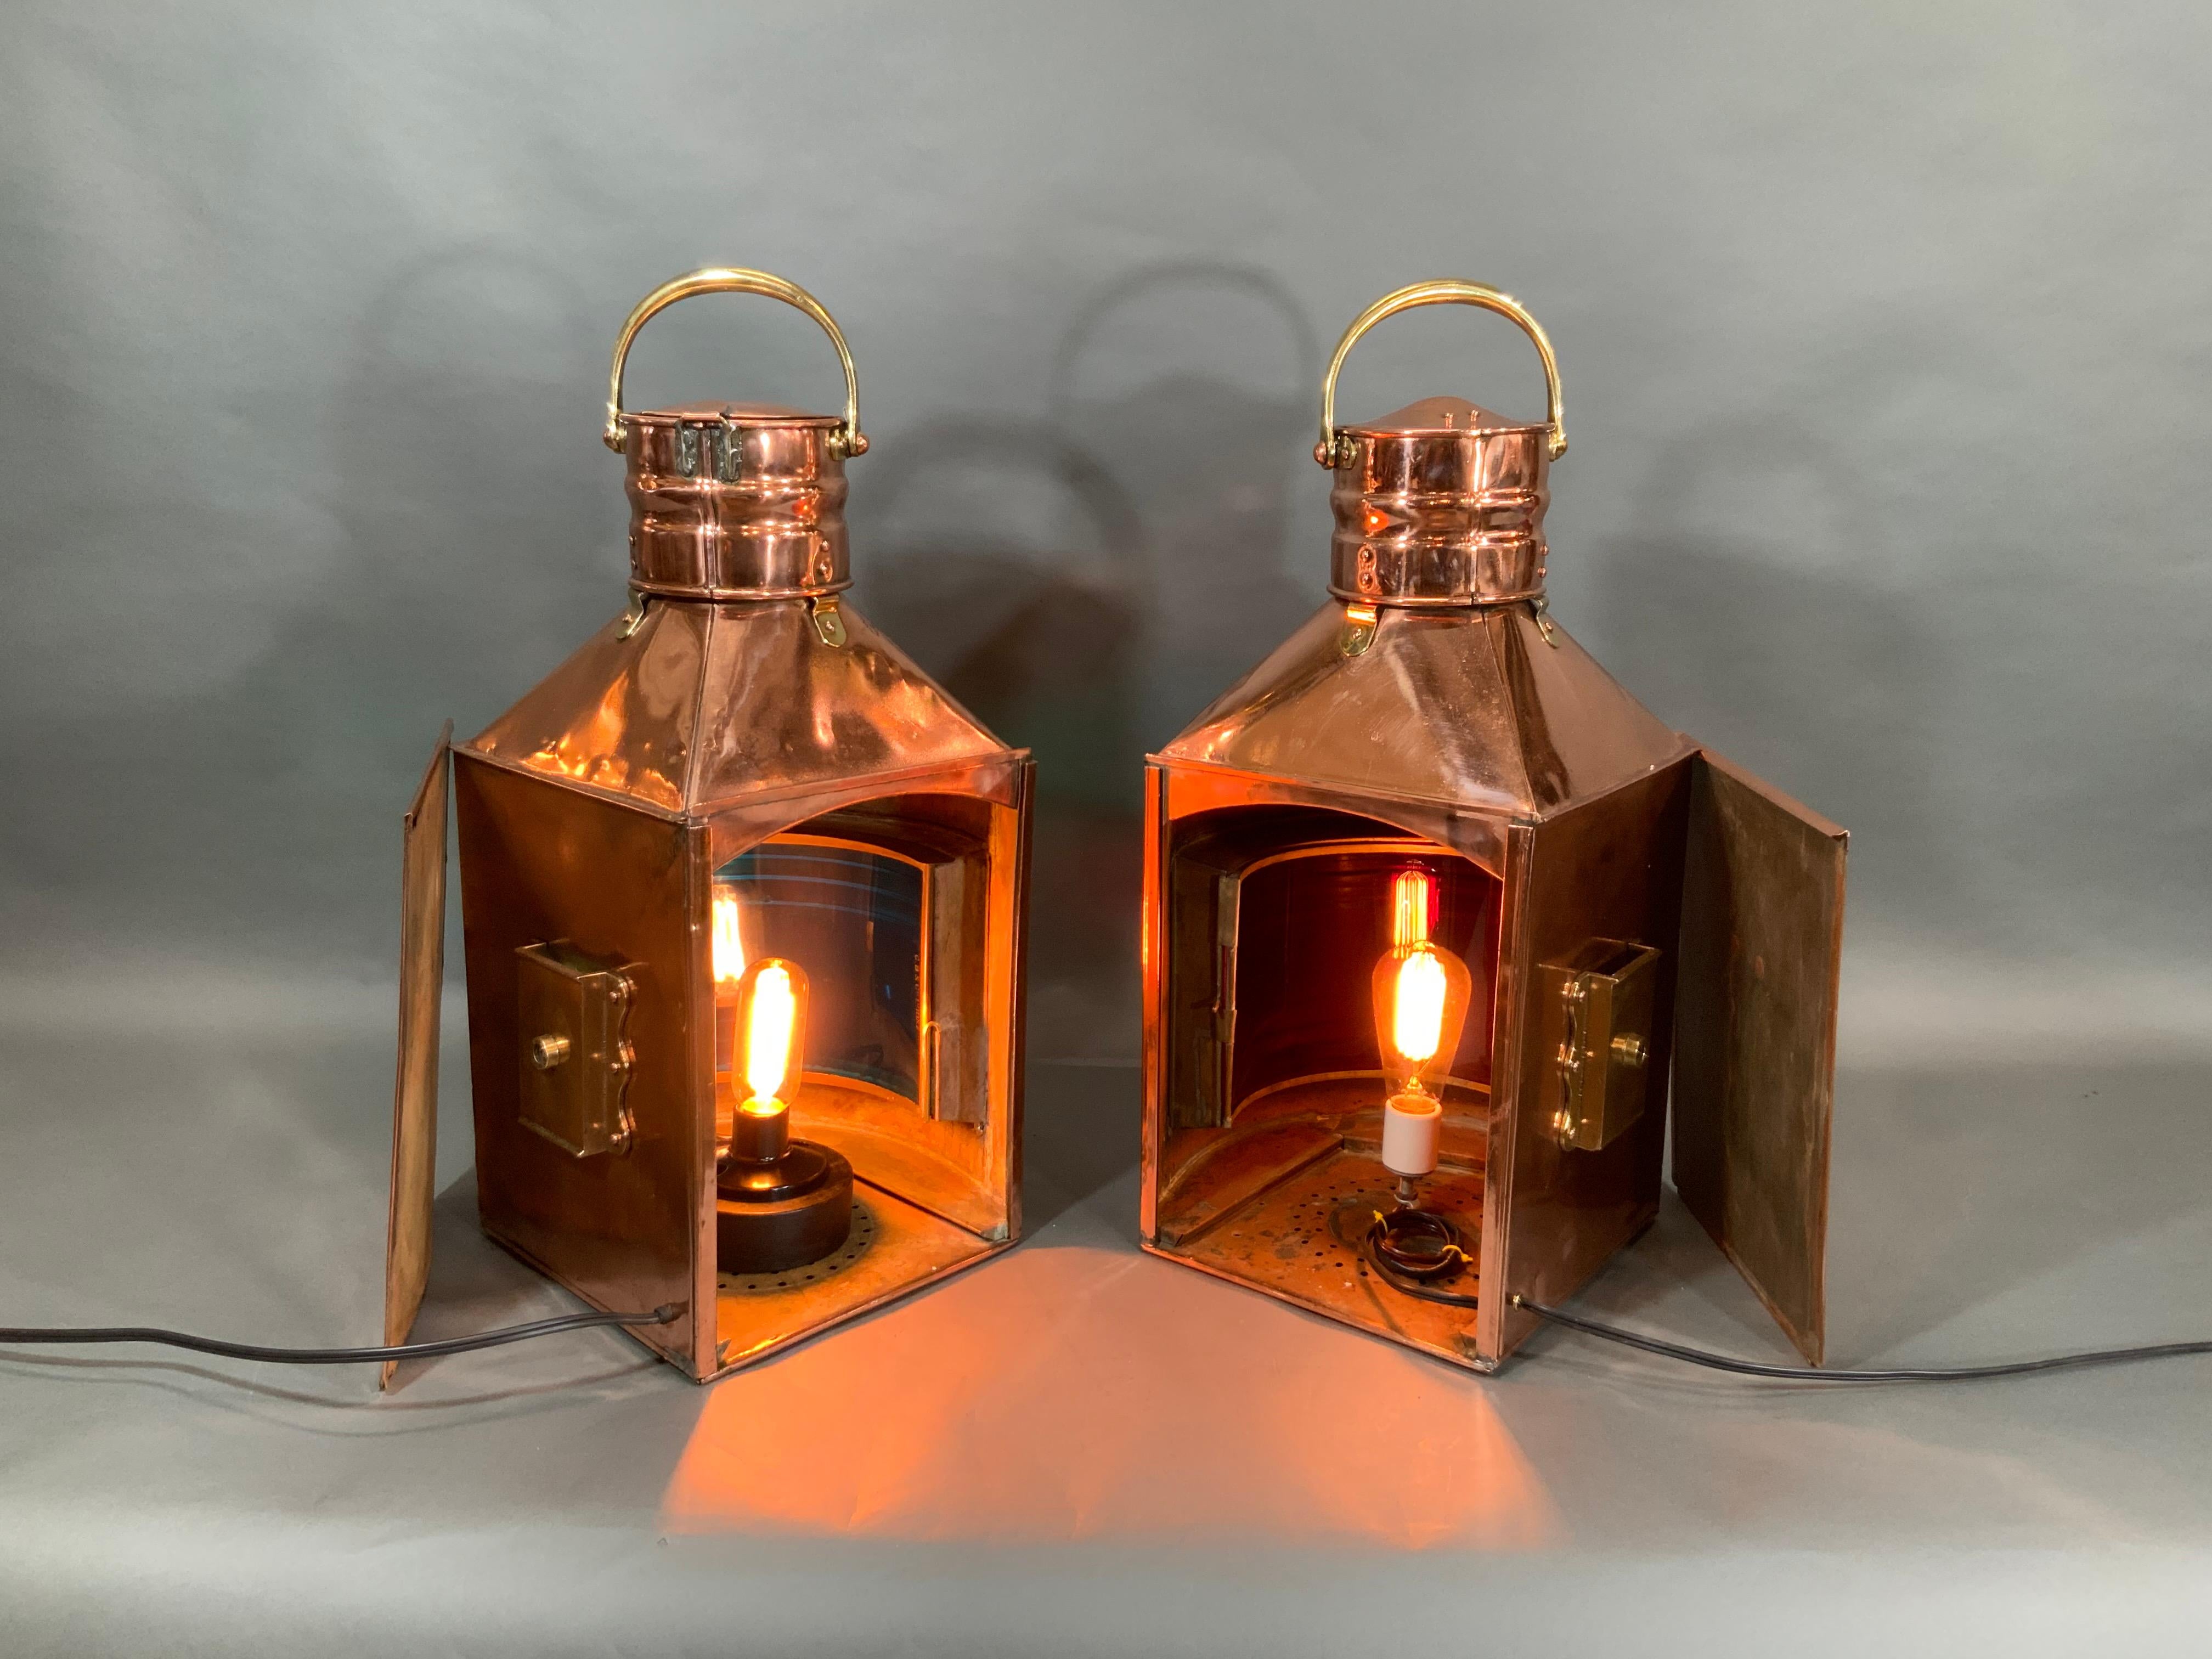 English Pair of Copper Port and Starboard Ships Lanterns by Meteorite, 